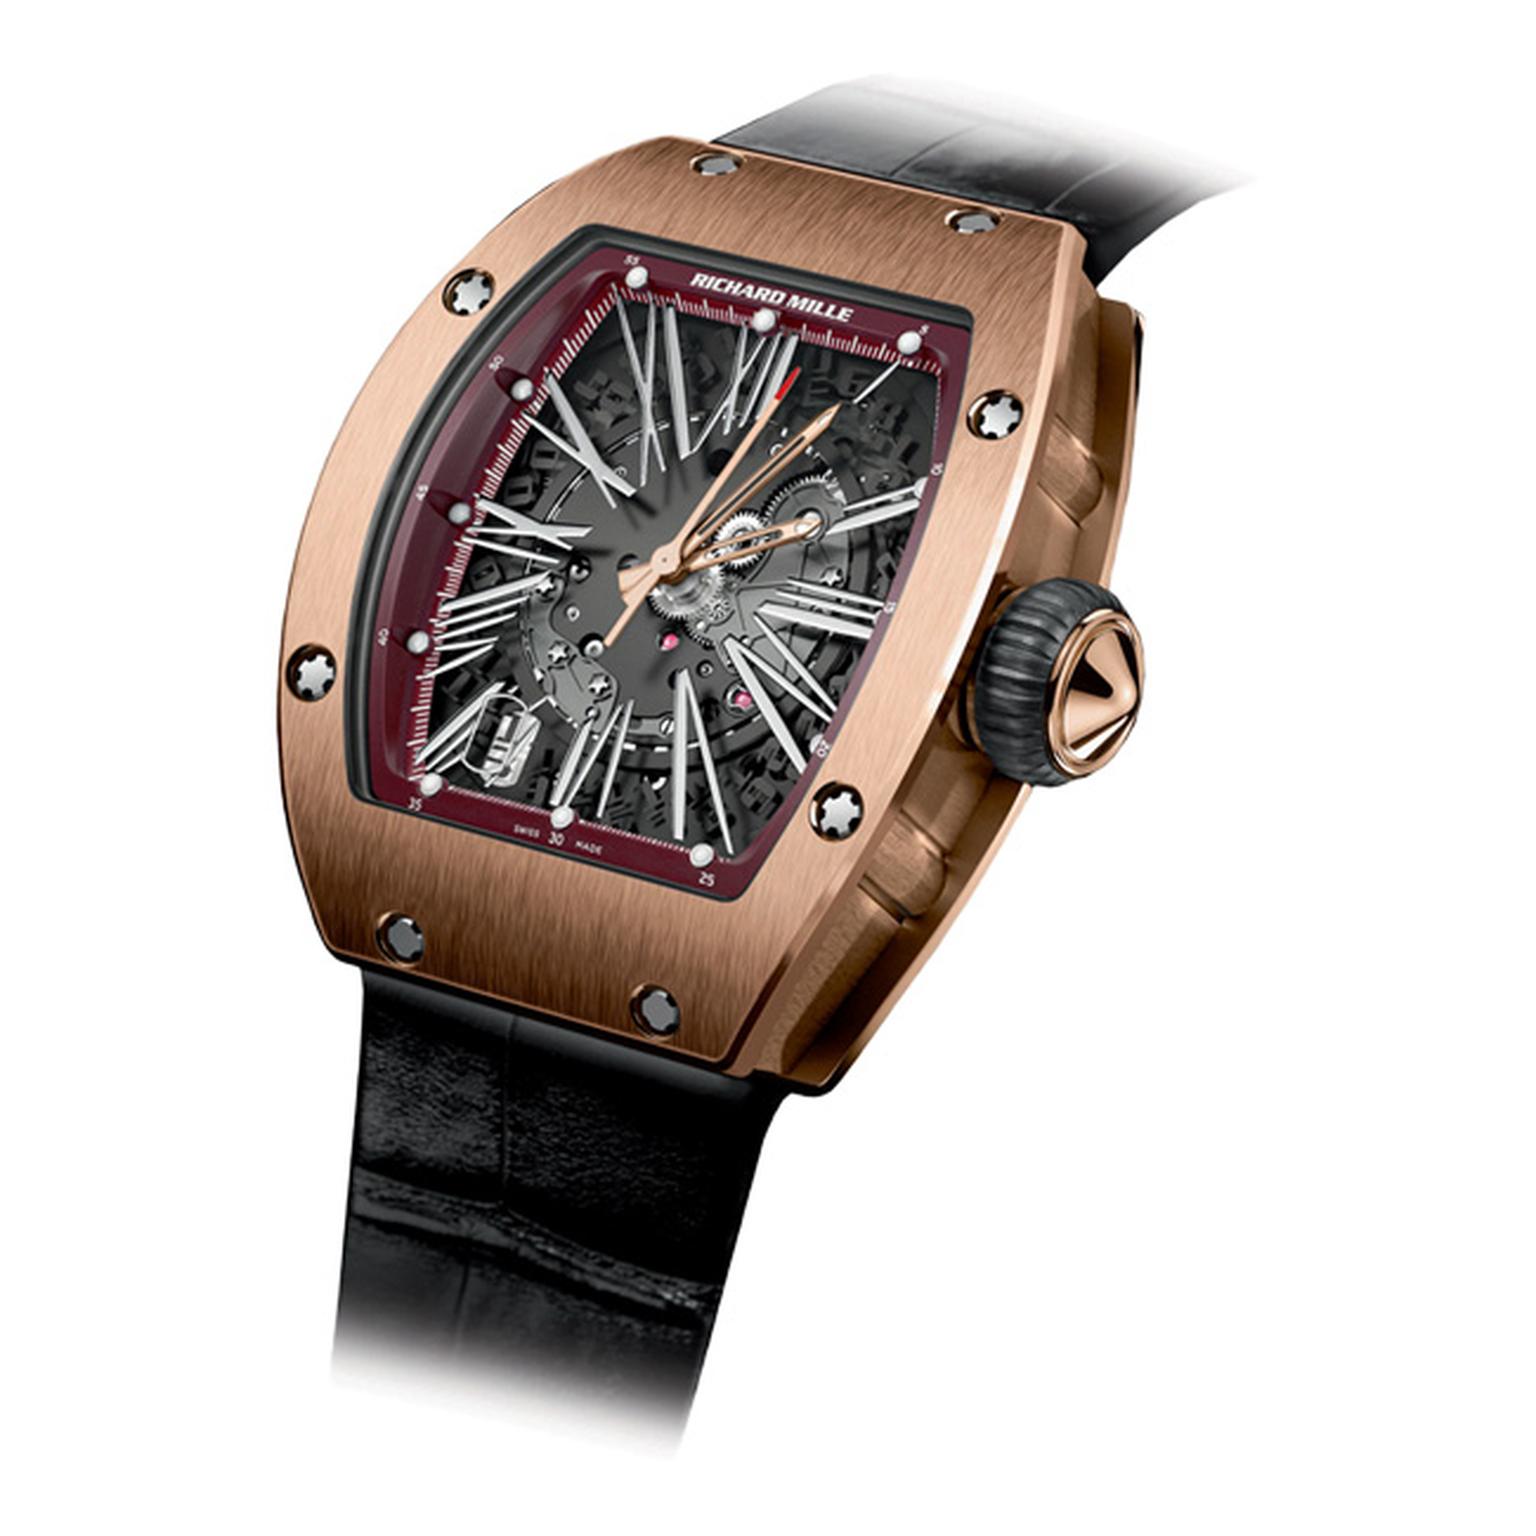 Richard Mille RM 023 in red gold_20131127_Main